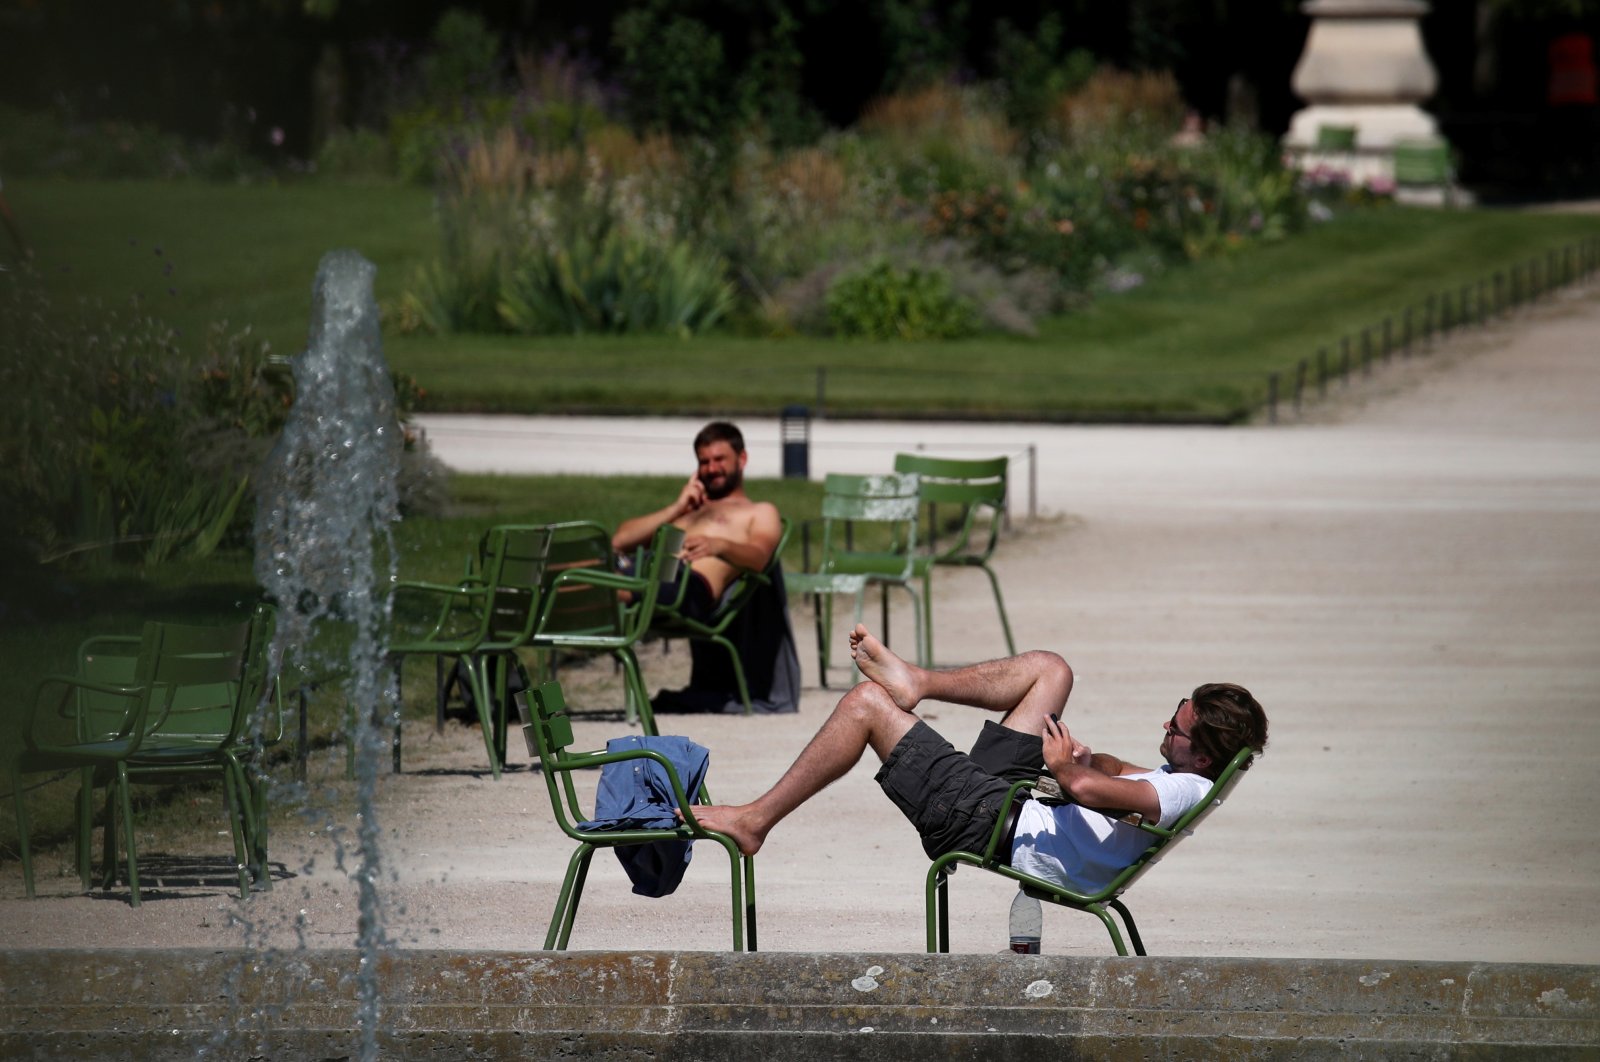 People sunbath at the Jardin des Tuileries during a warm and sunny day in Paris as a heatwave hits France, June 25, 2020. (REUTERS Photo)